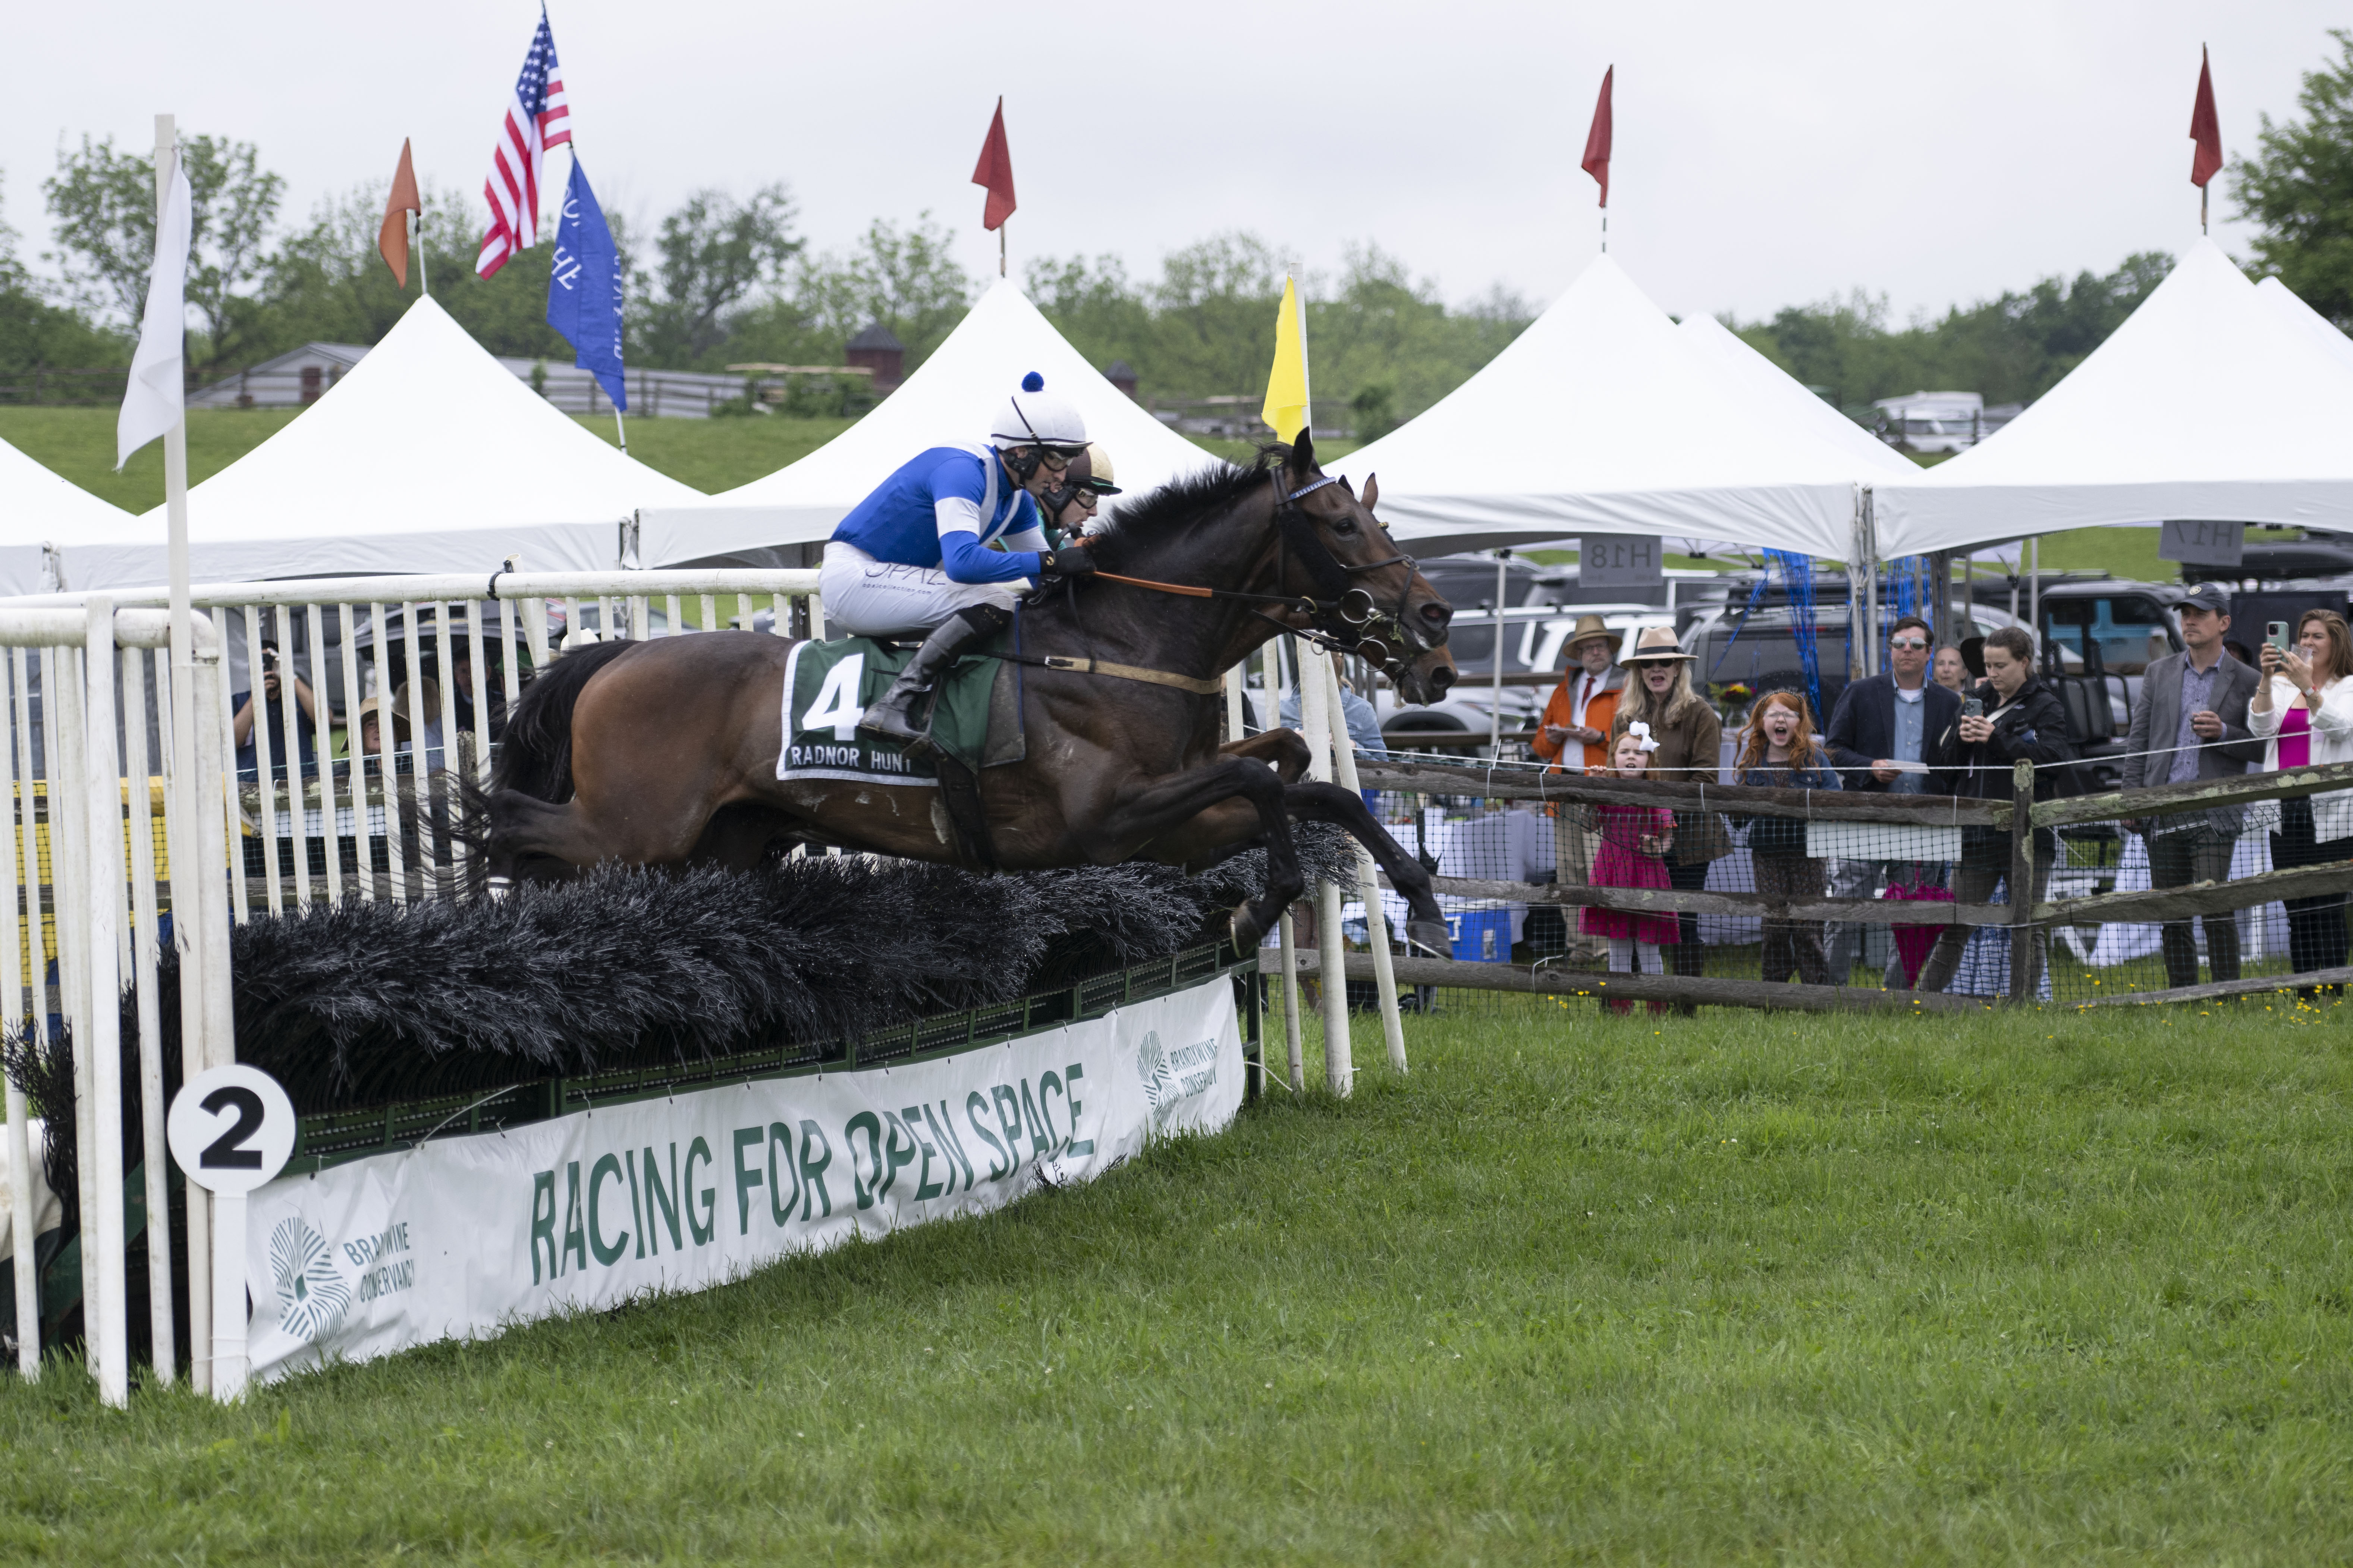 wide angle shot of two horses jumping at a steeplechase event while crowds watch from the sidelines